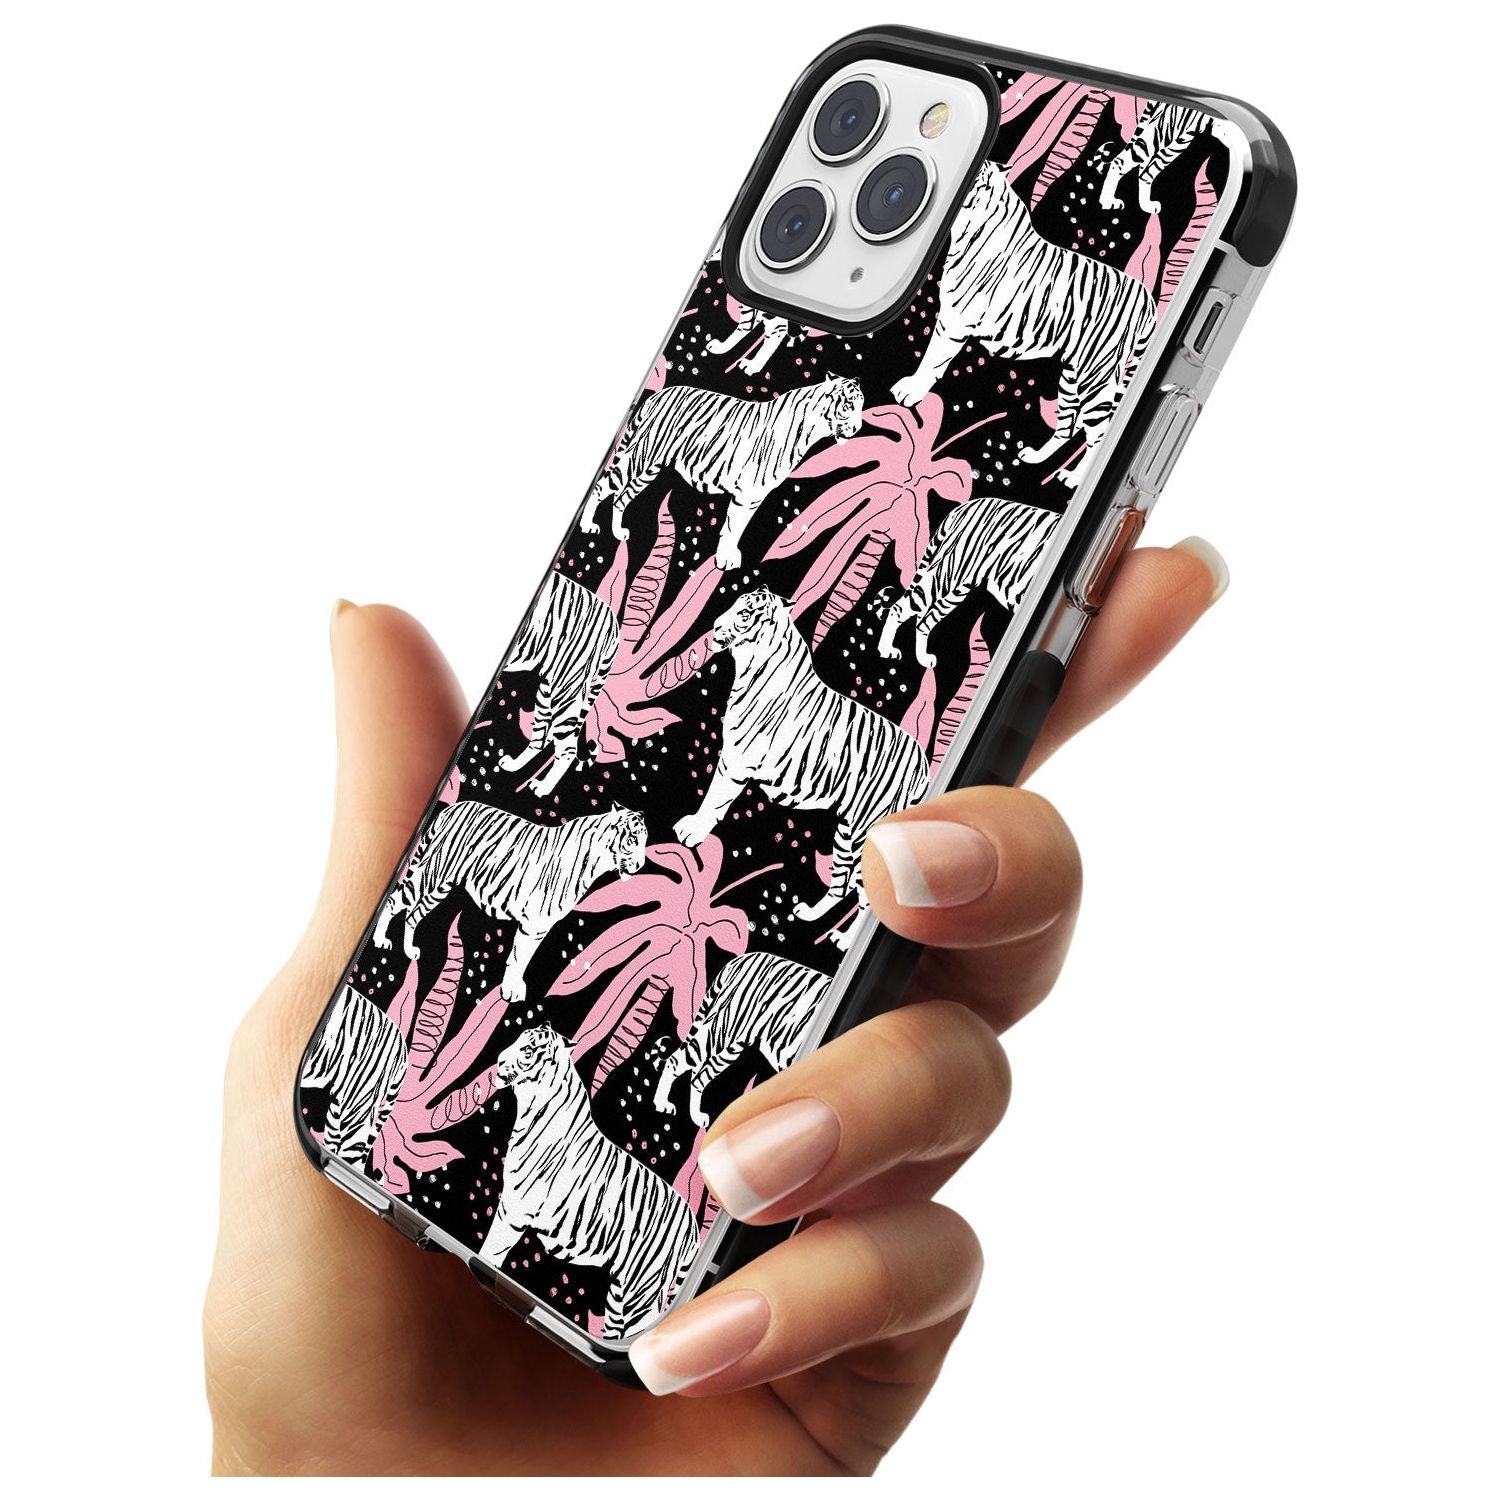 White Tigers on Black Pattern Black Impact Phone Case for iPhone 11 Pro Max